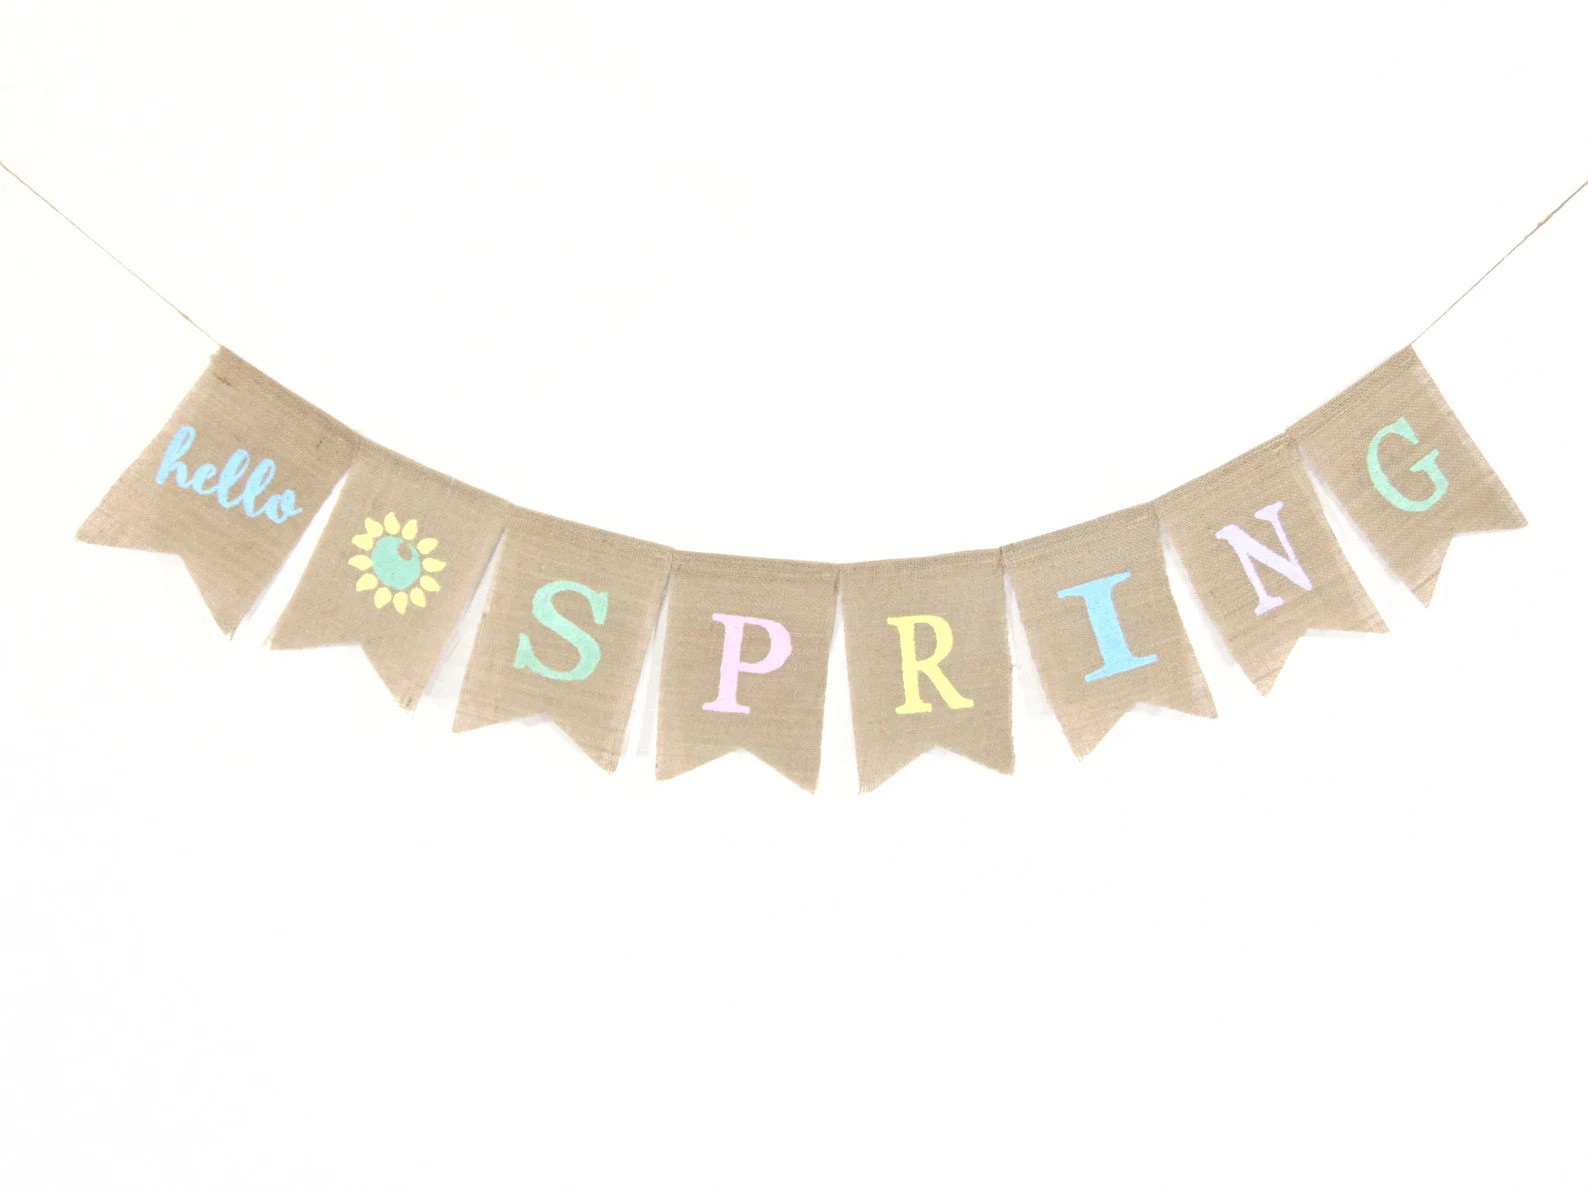 18 Spring Banner Designs to Add a Pop of Color to Your Home